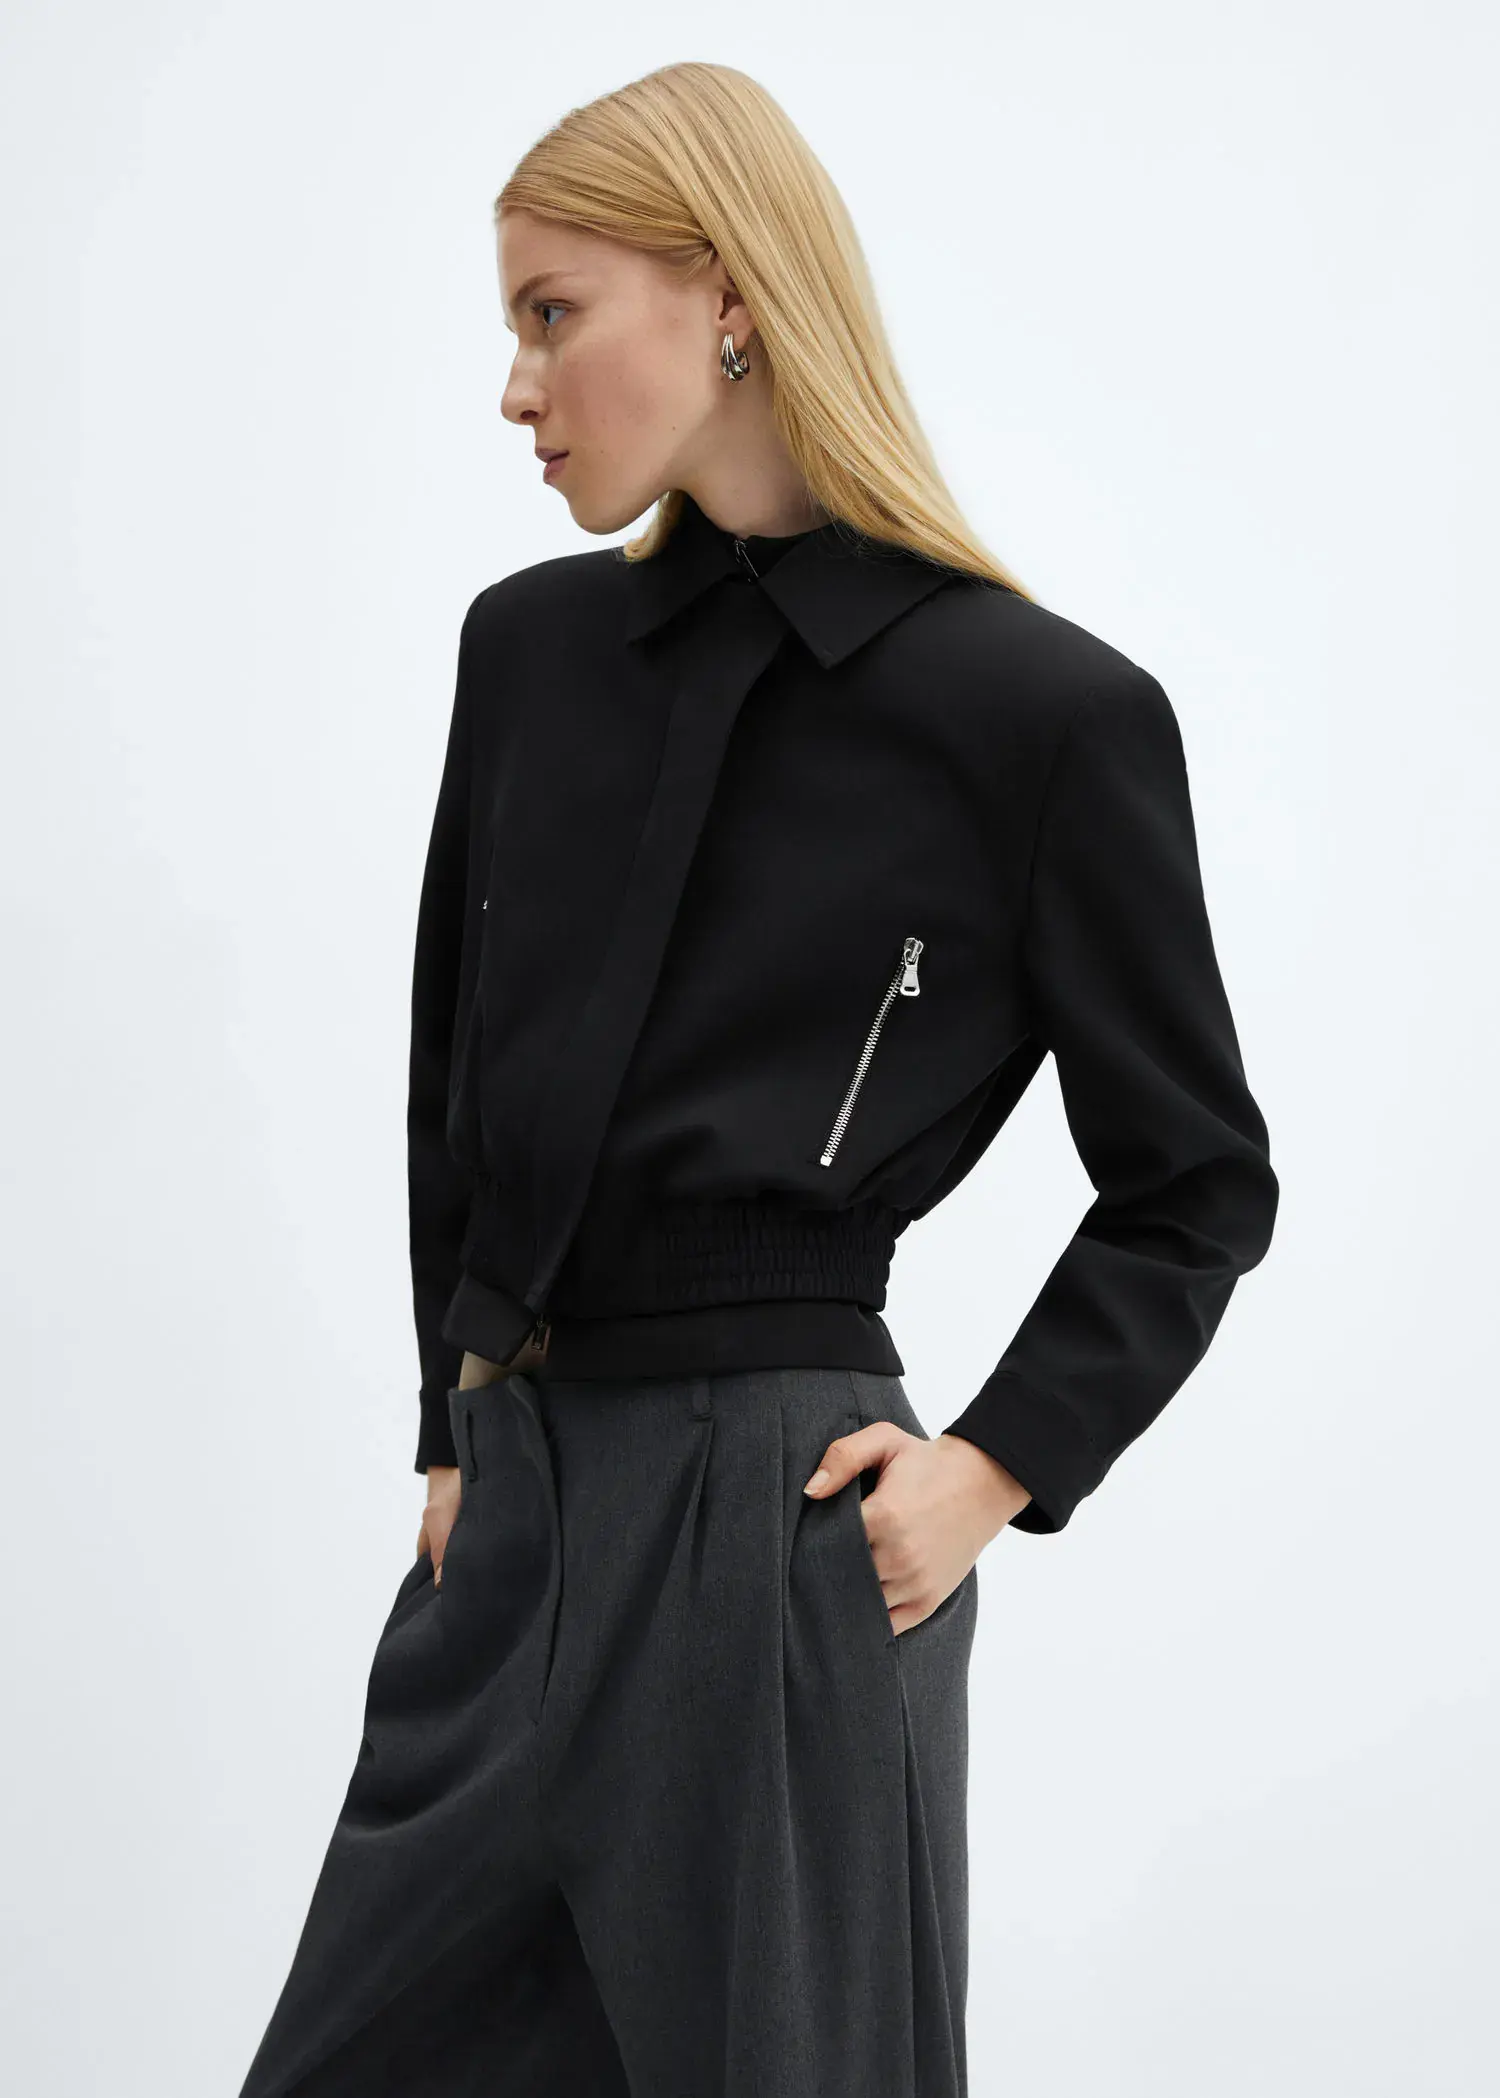 Mango Cropped jacket with shoulder pads. 2